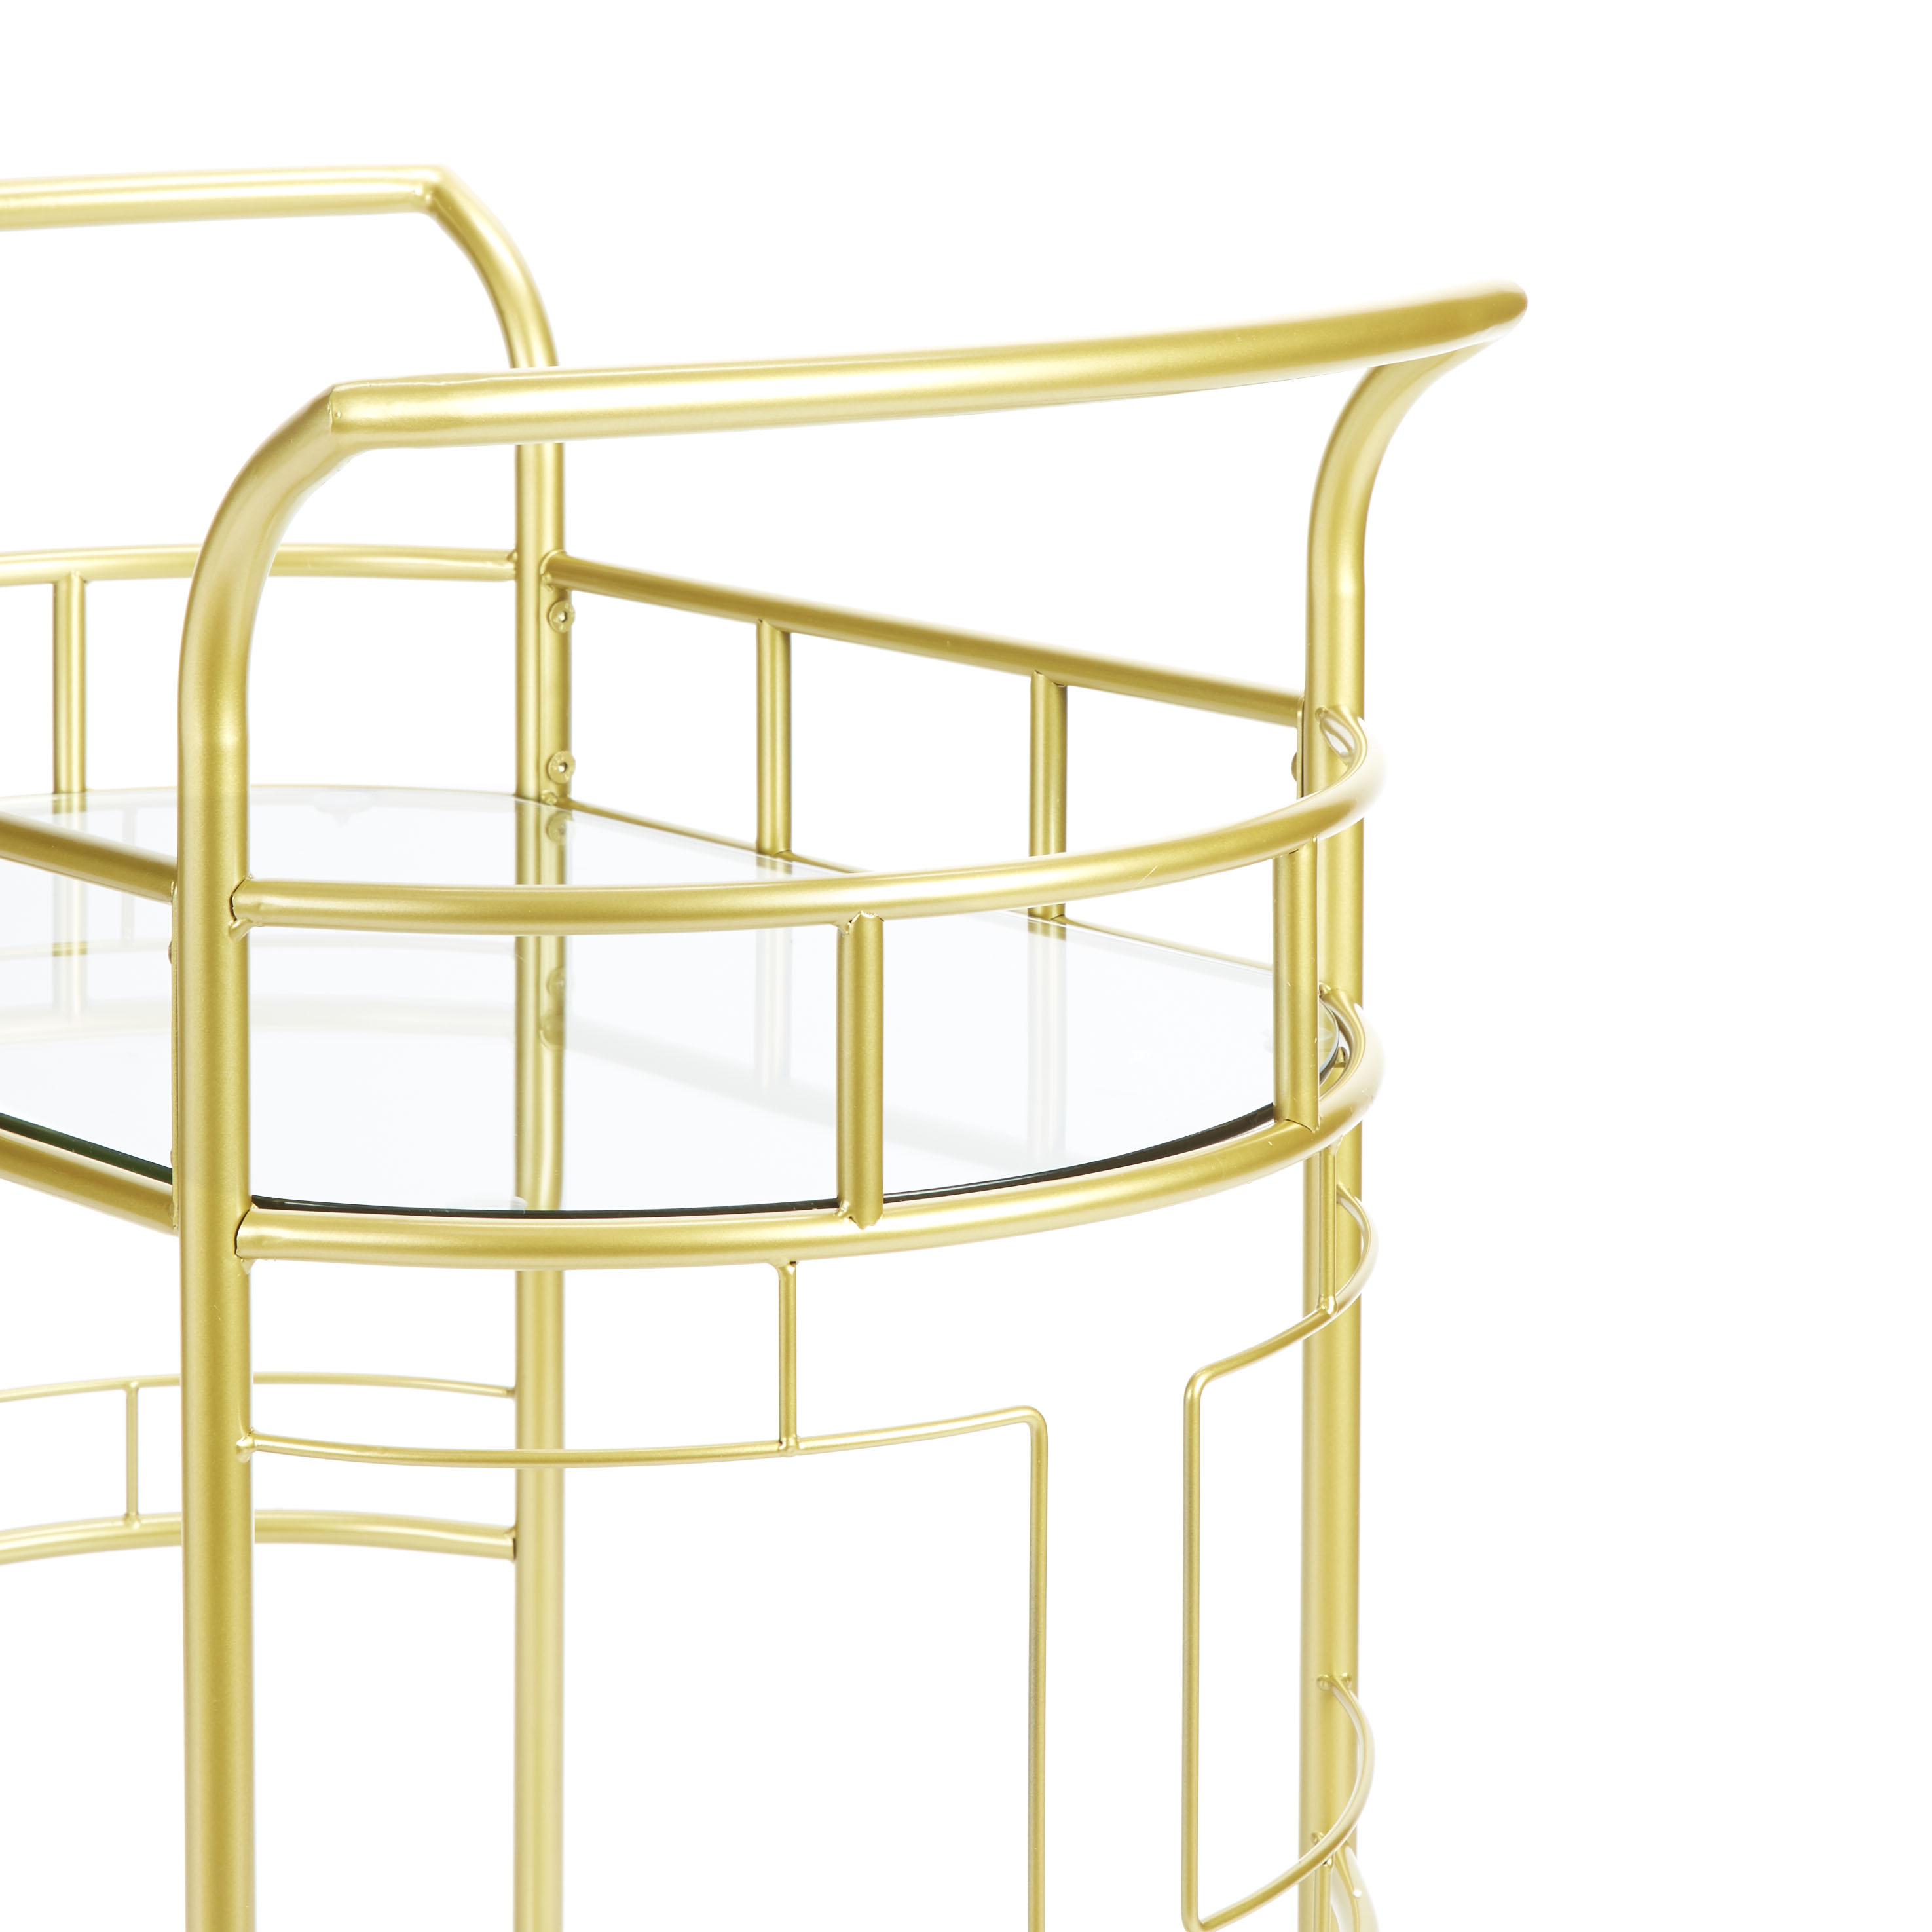 Better Homes & Gardens Fitzgerald Bar Cart with Matte Gold Metal Finish, 2-Tiers - image 4 of 10